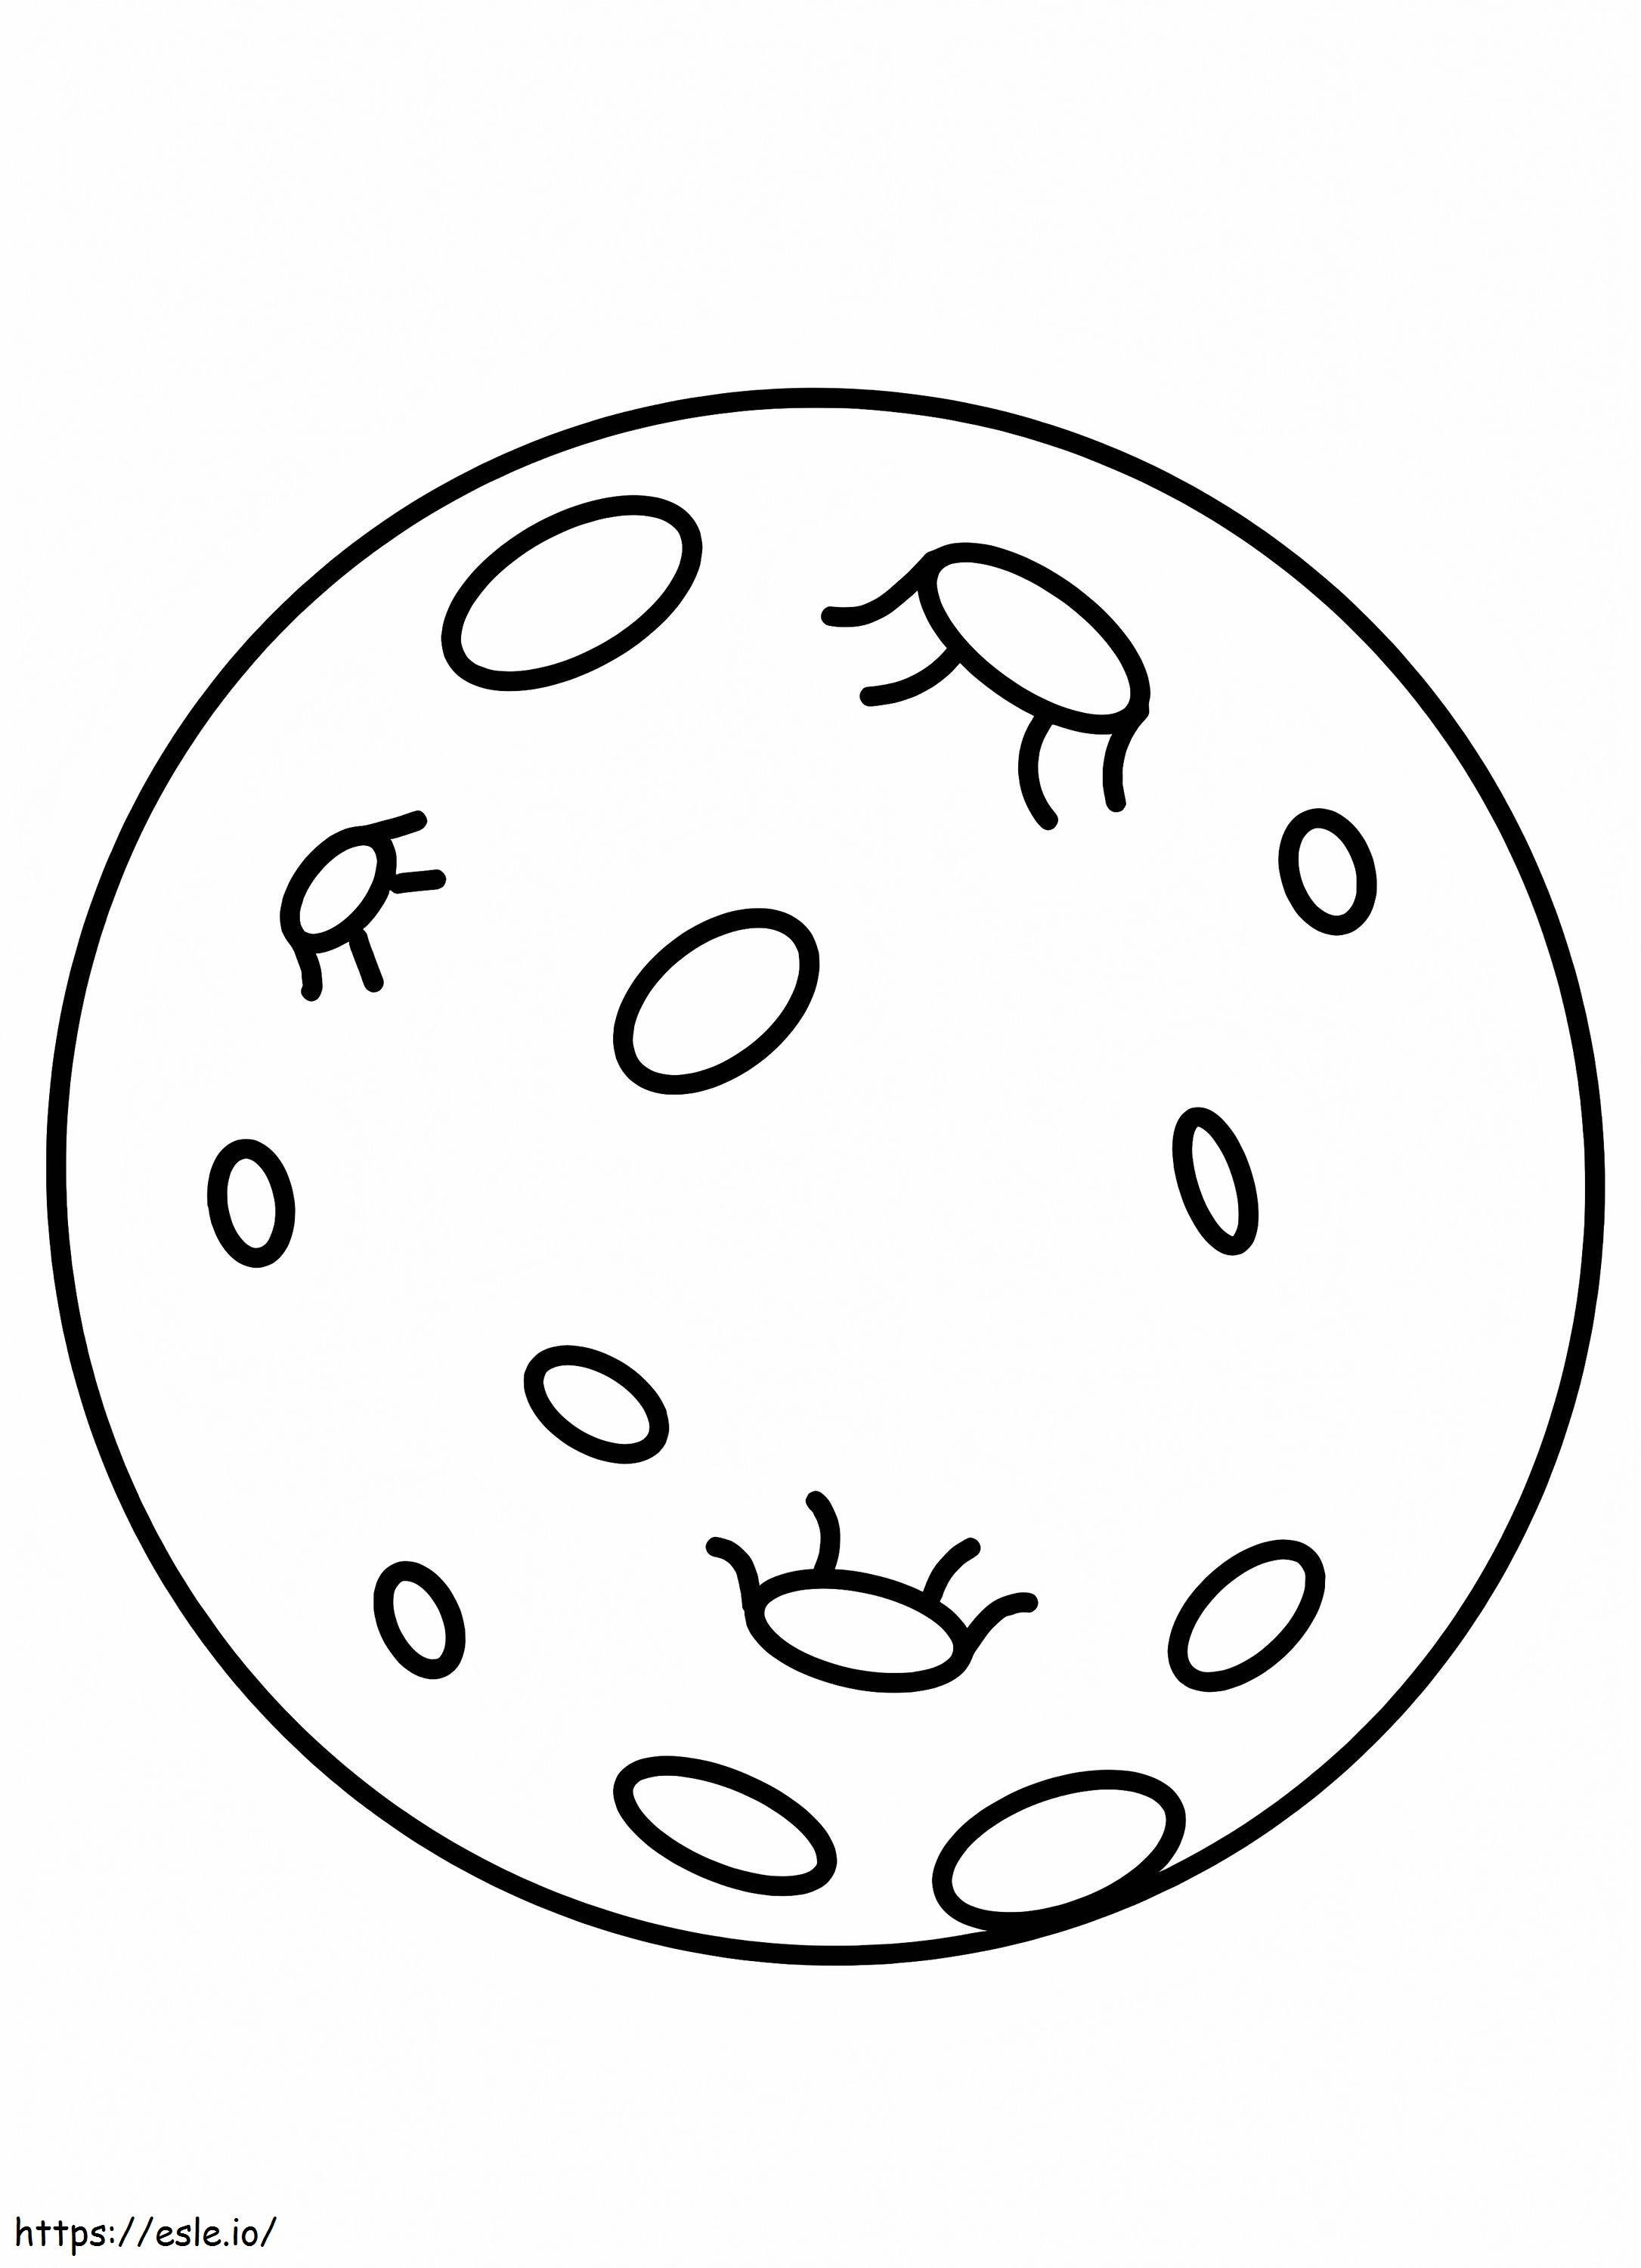 Simple Full Moon coloring page